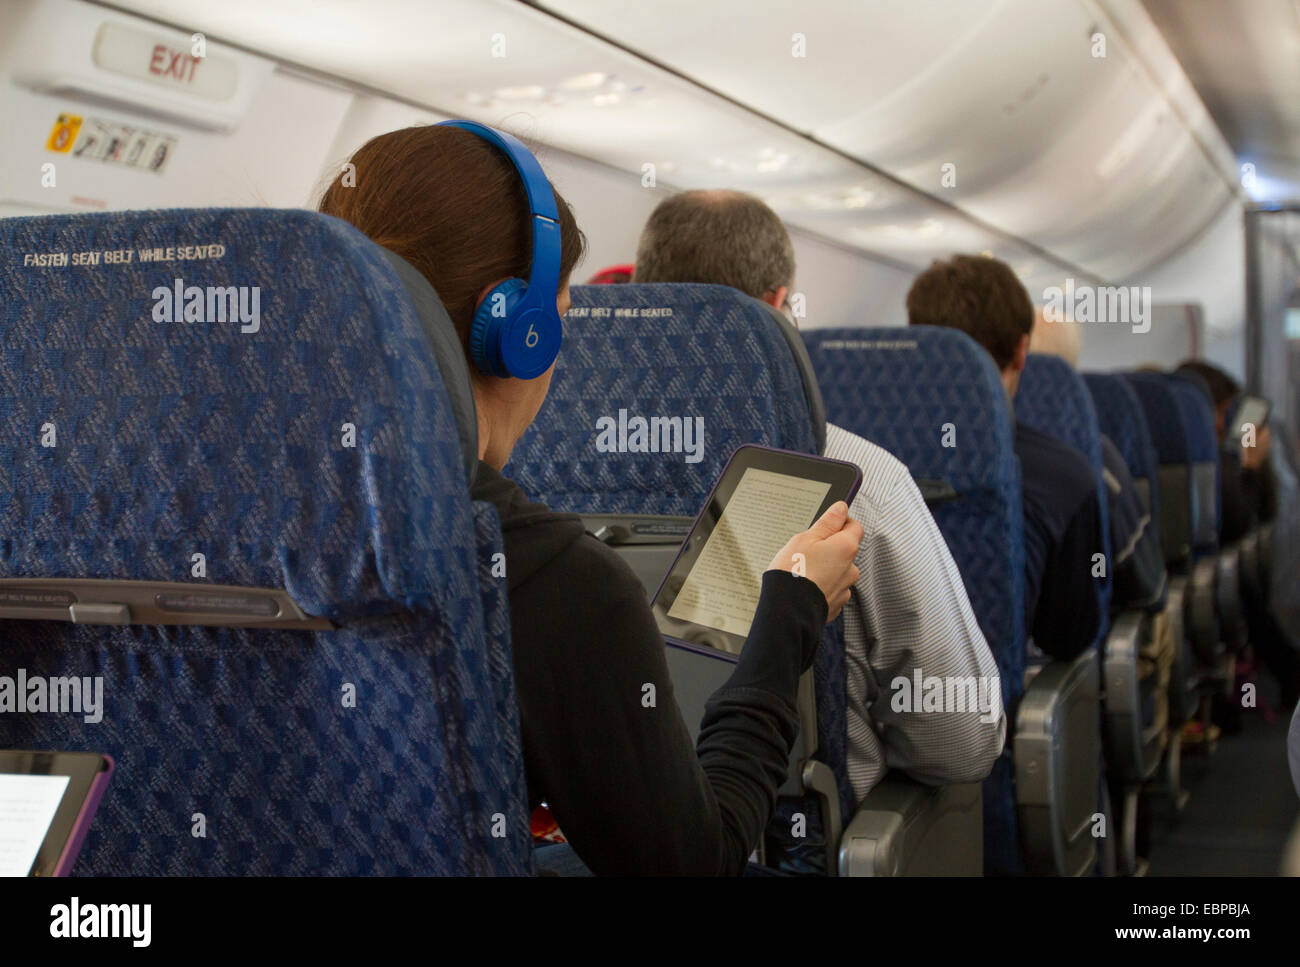 American Air;line passenger reading a tablet during a flight. Stock Photo